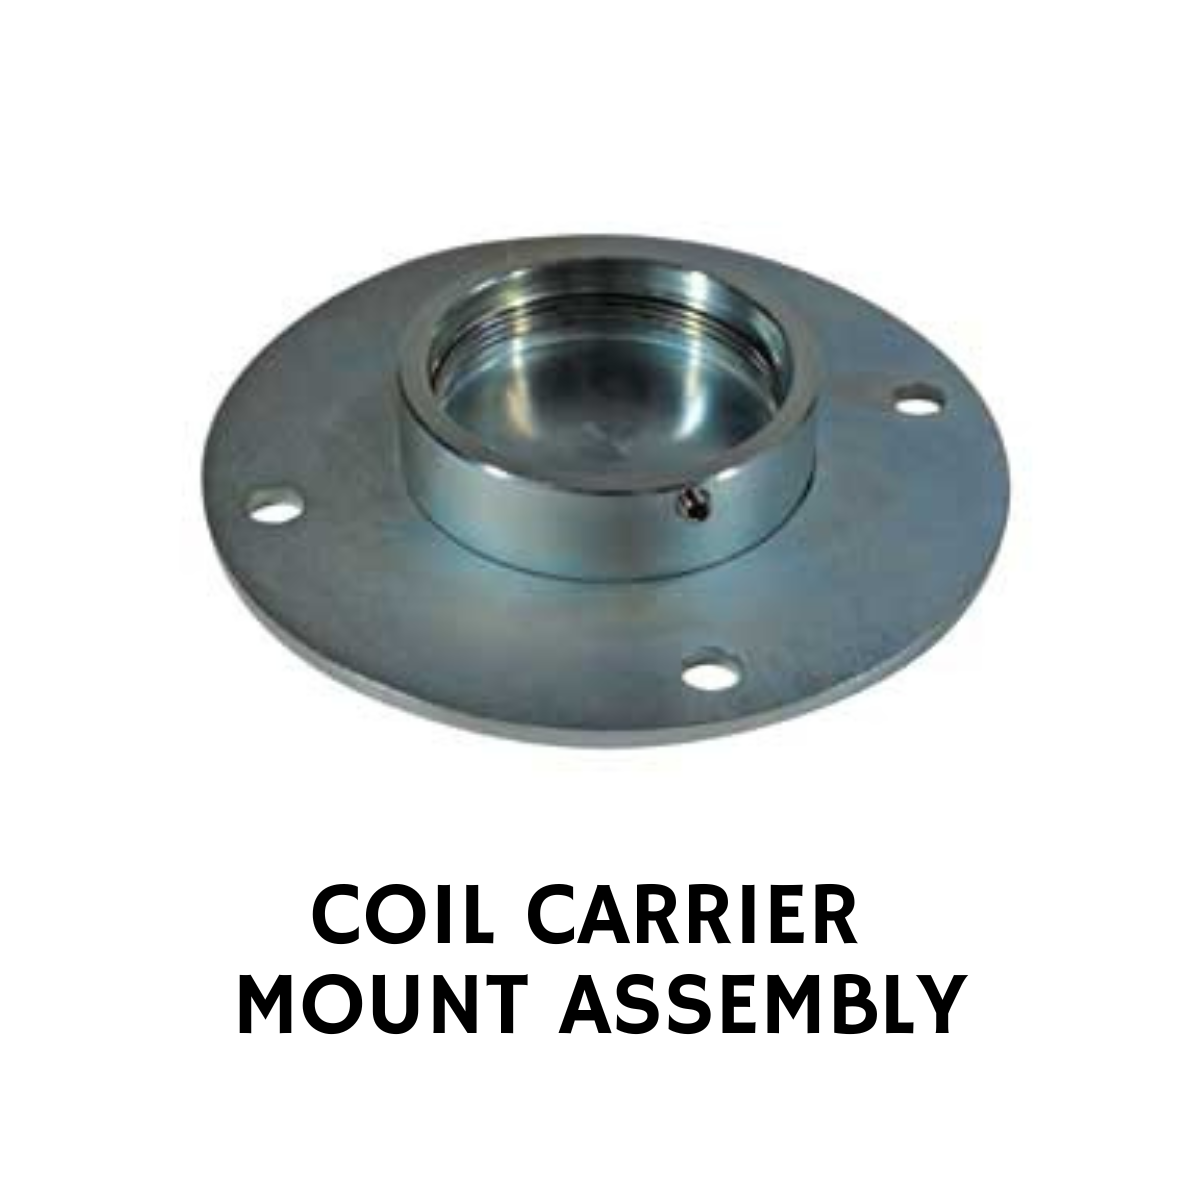 COIL CARRIER MOUNT ASSEMBLY